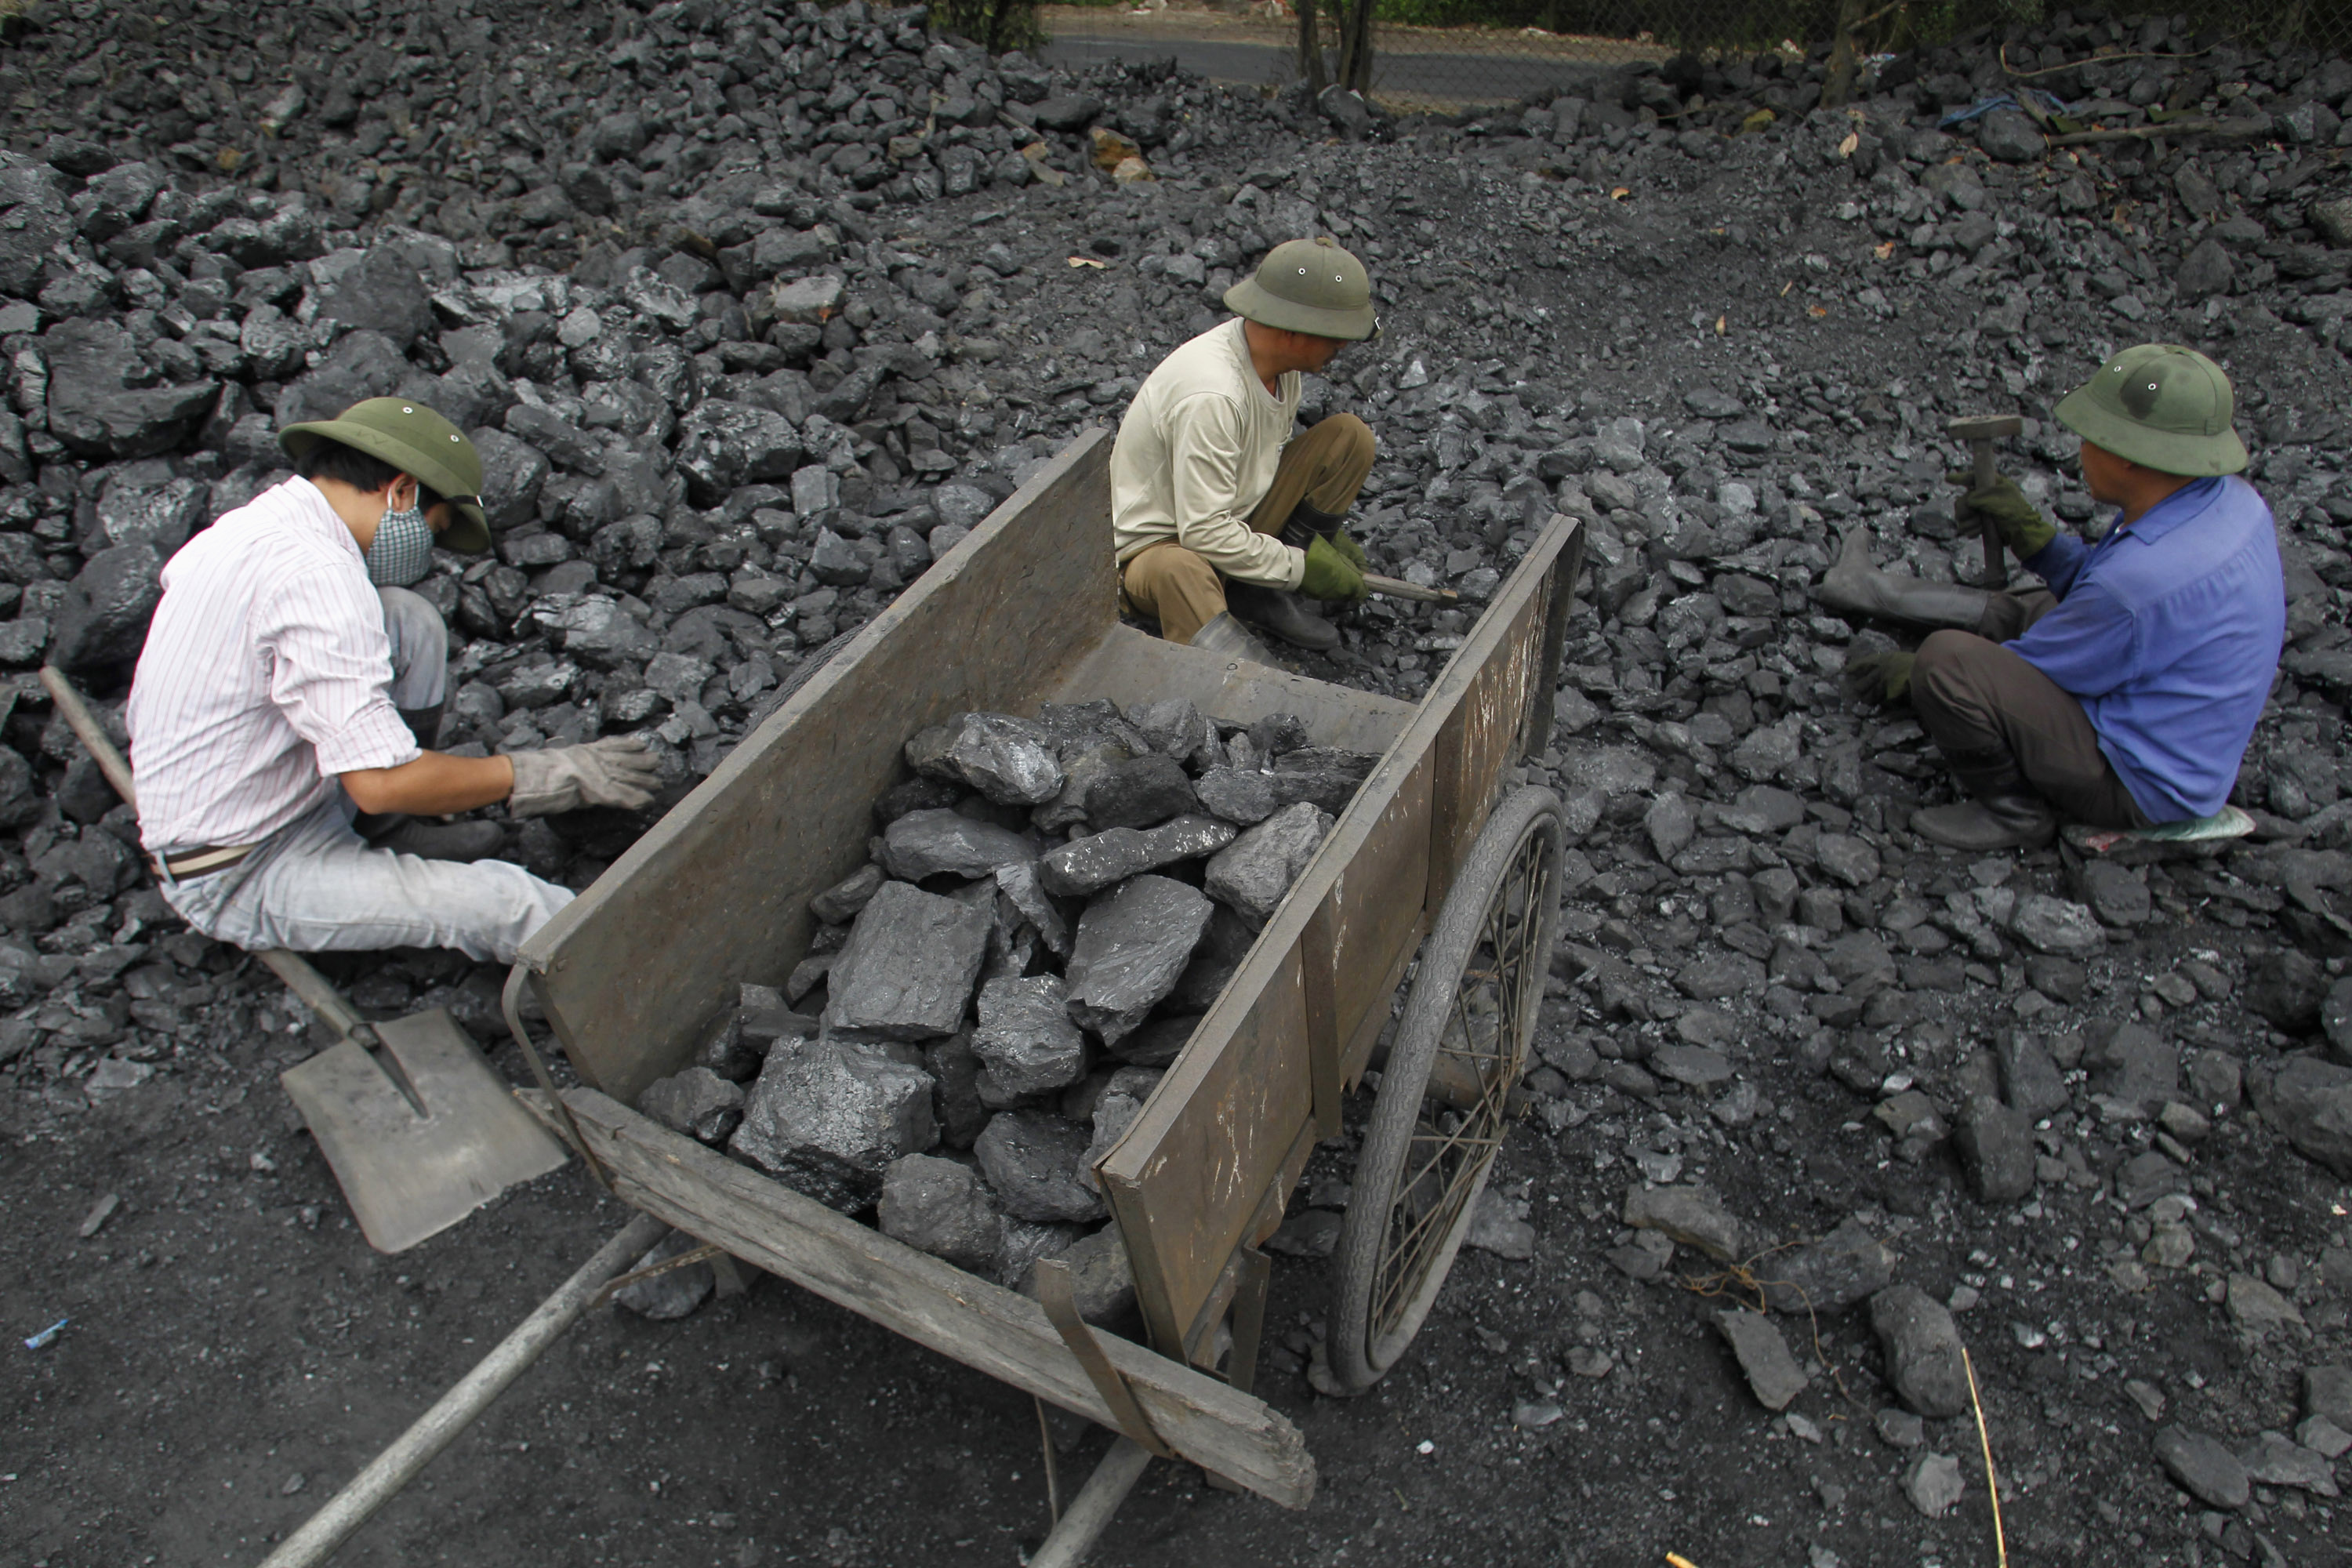 Workers pick out gravel from coal at a coal port in Hanoi